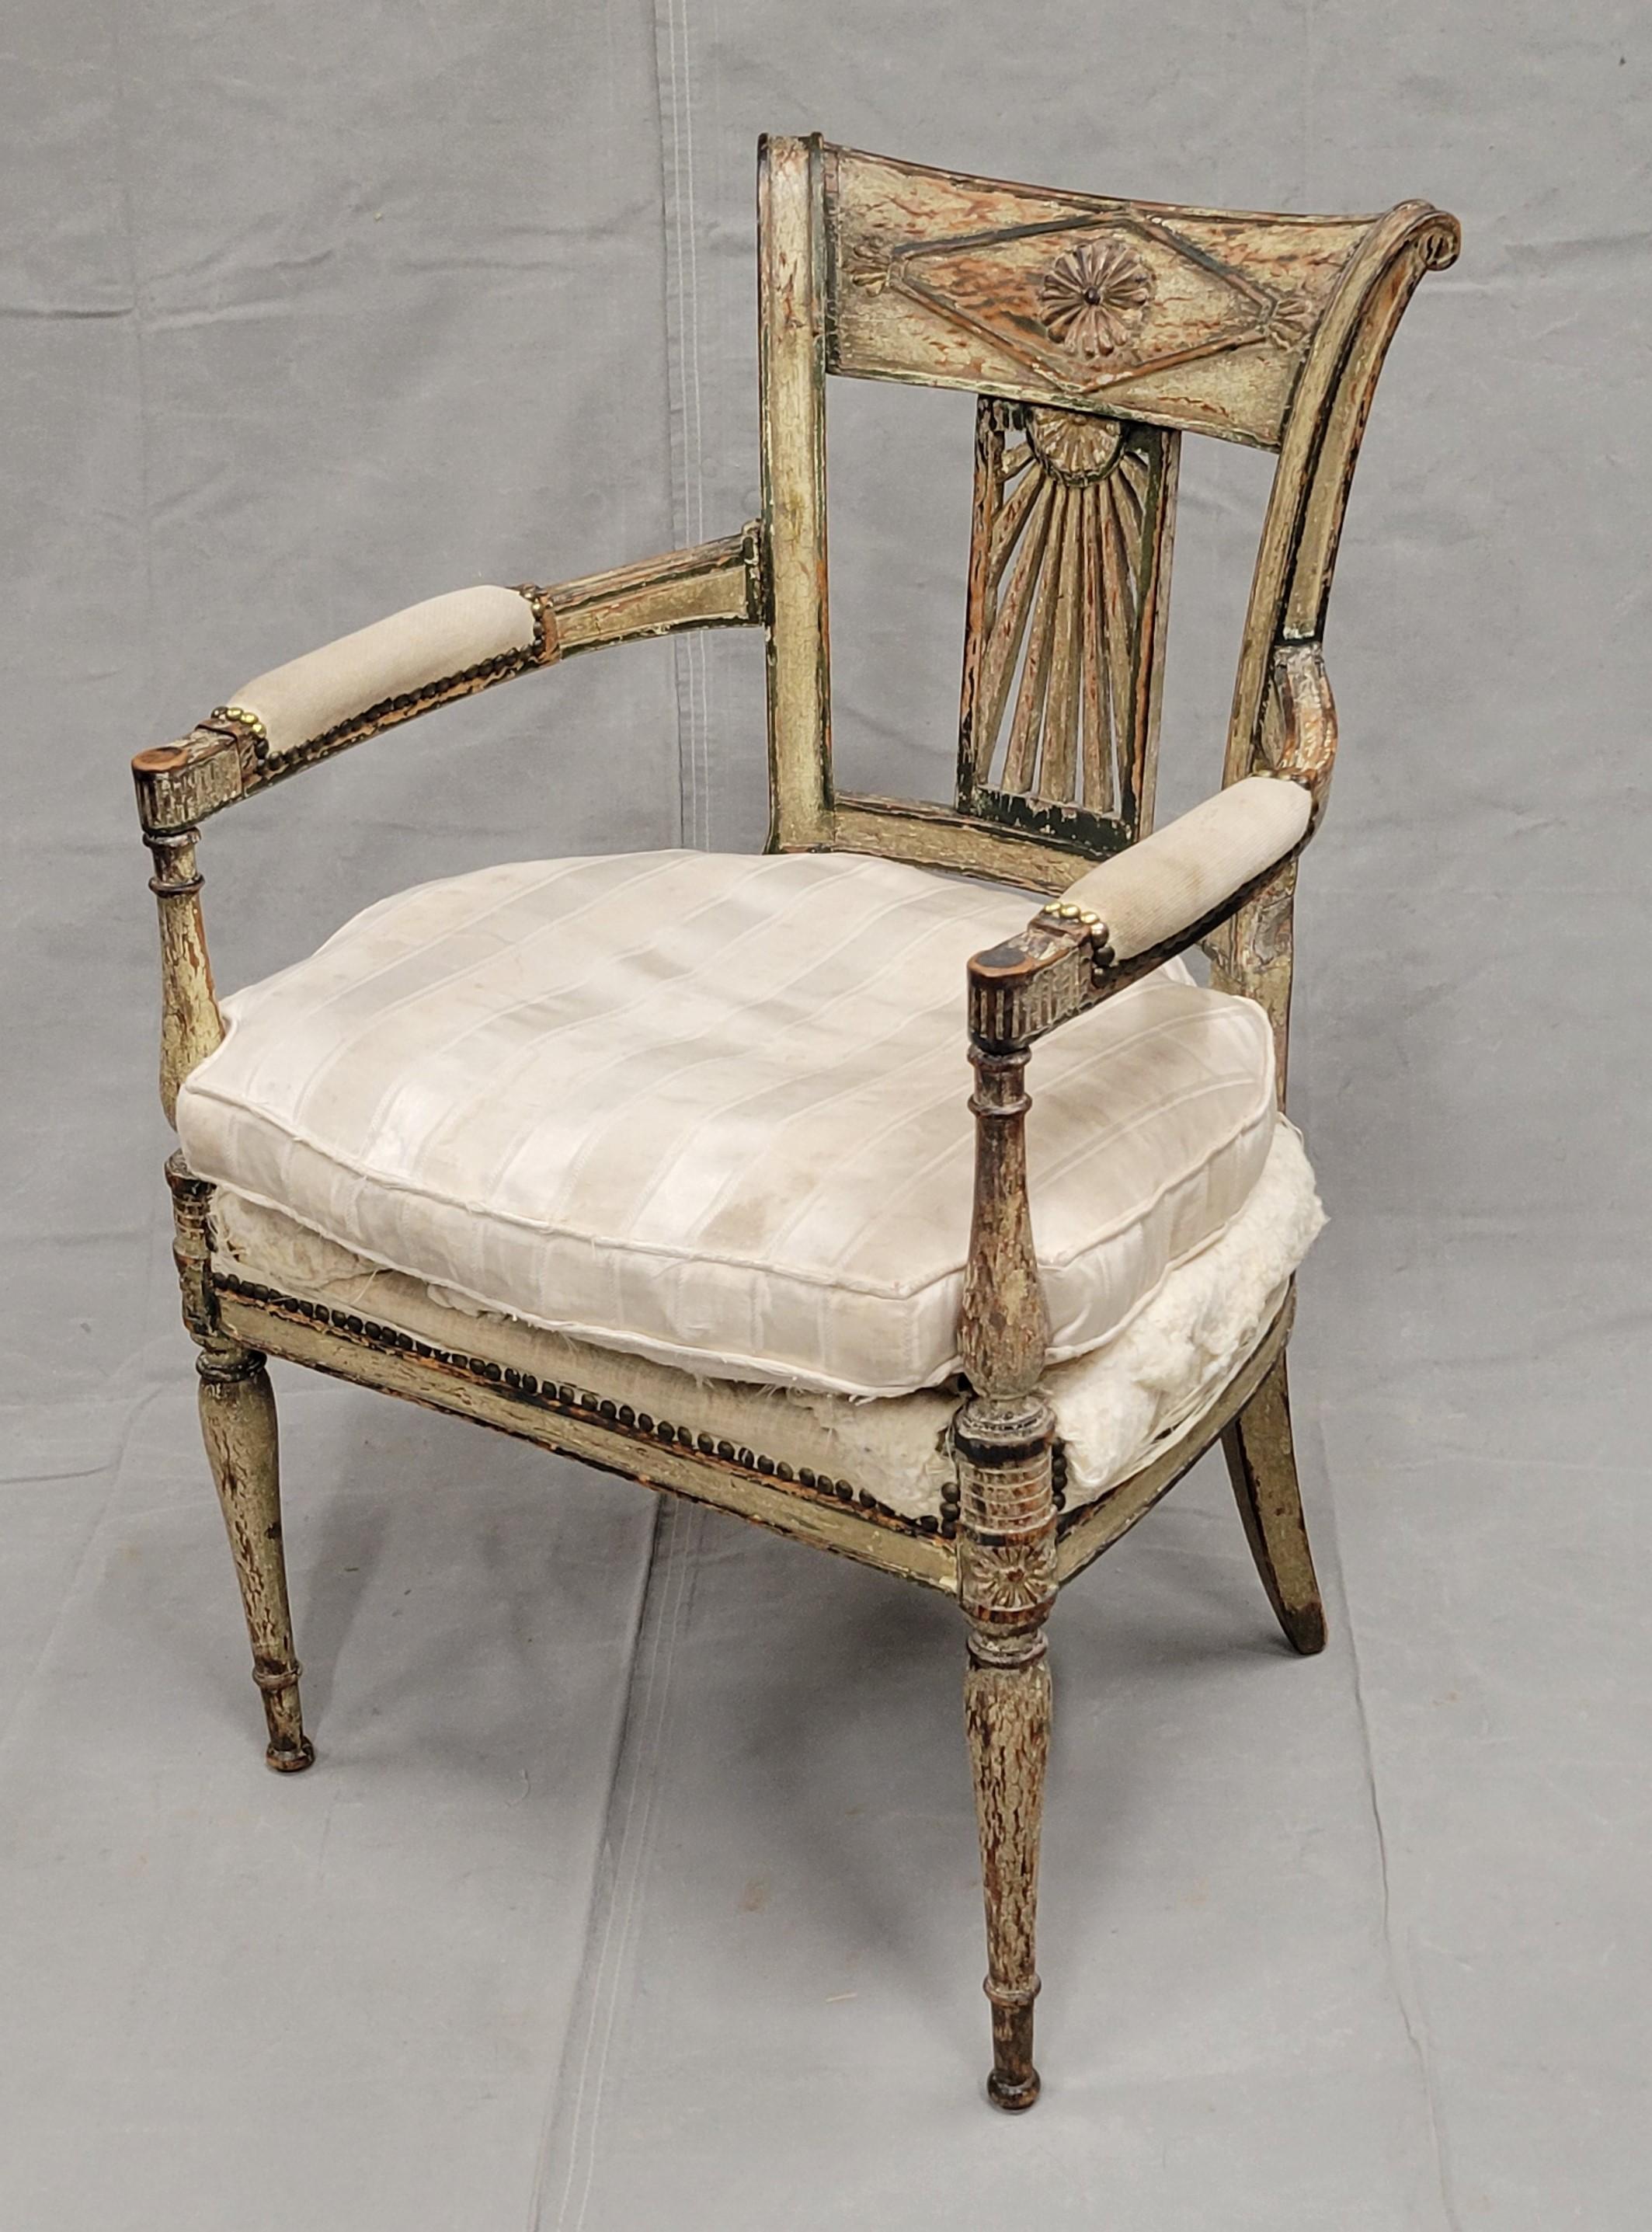 Brass Antique Maison Jansen Style French Louis XVI Painted Fauteuil Chairs - a Pair For Sale